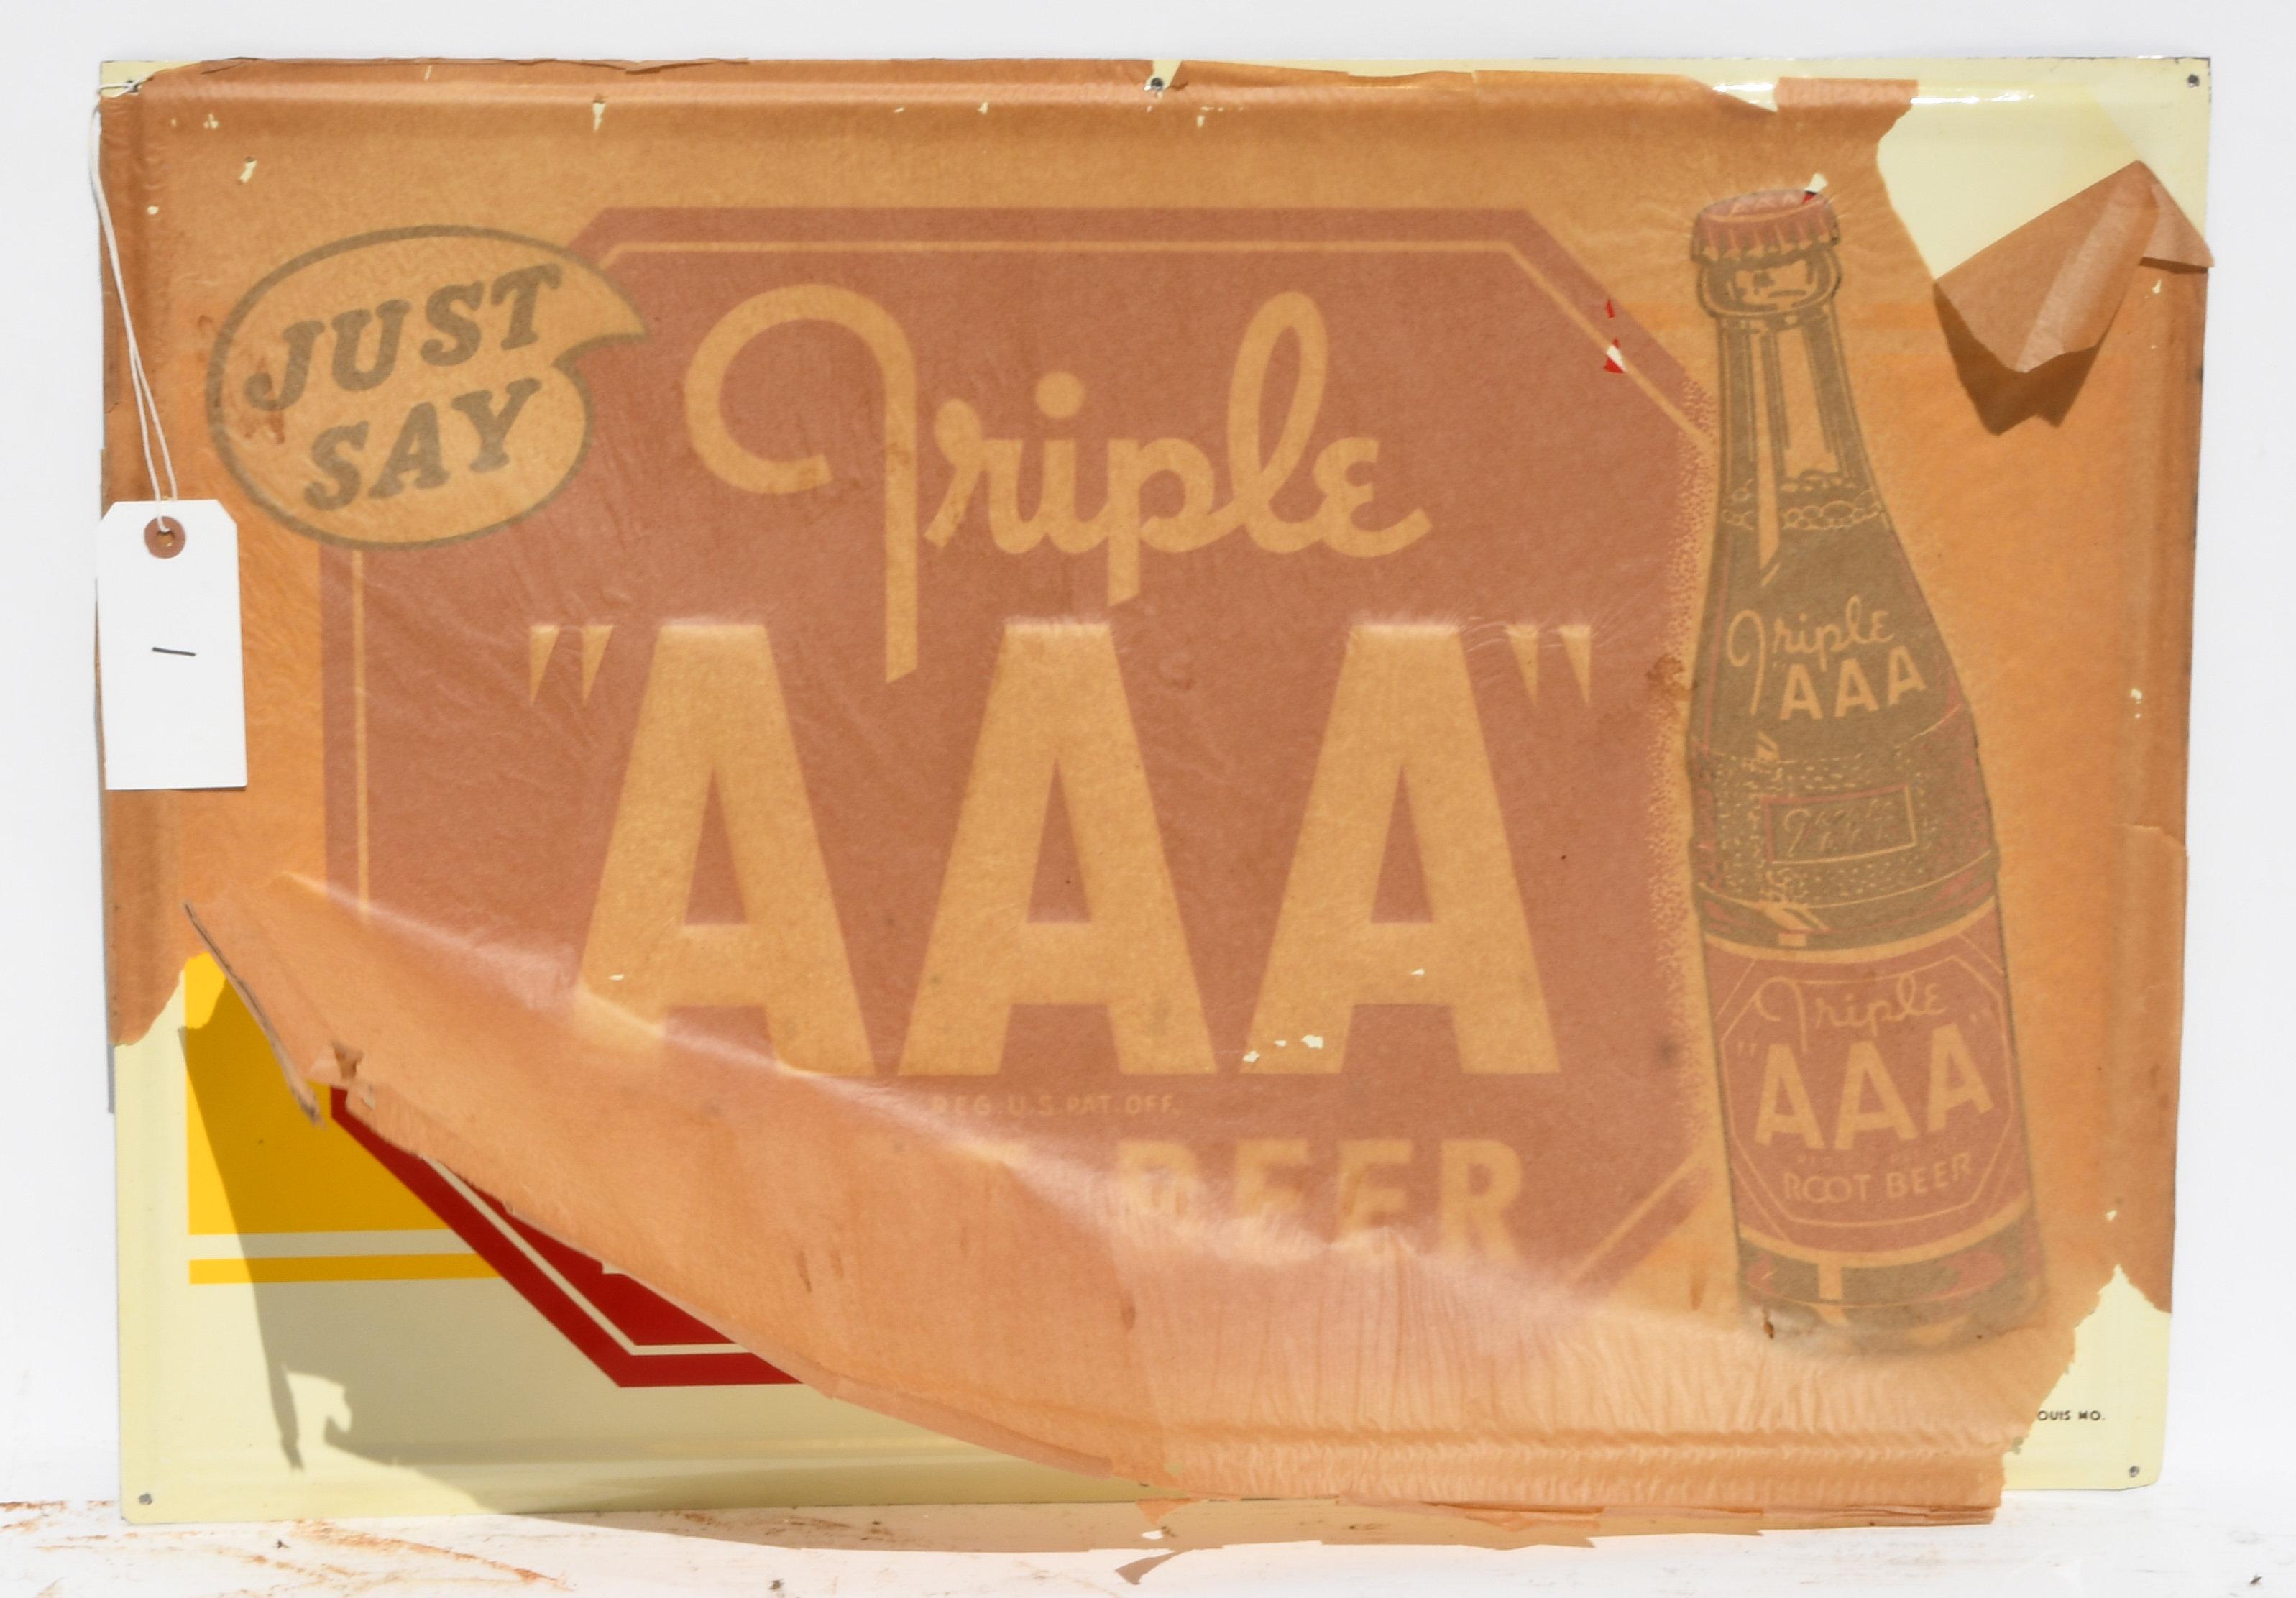 Triple AAA Rootbeer Tin Sign NOS